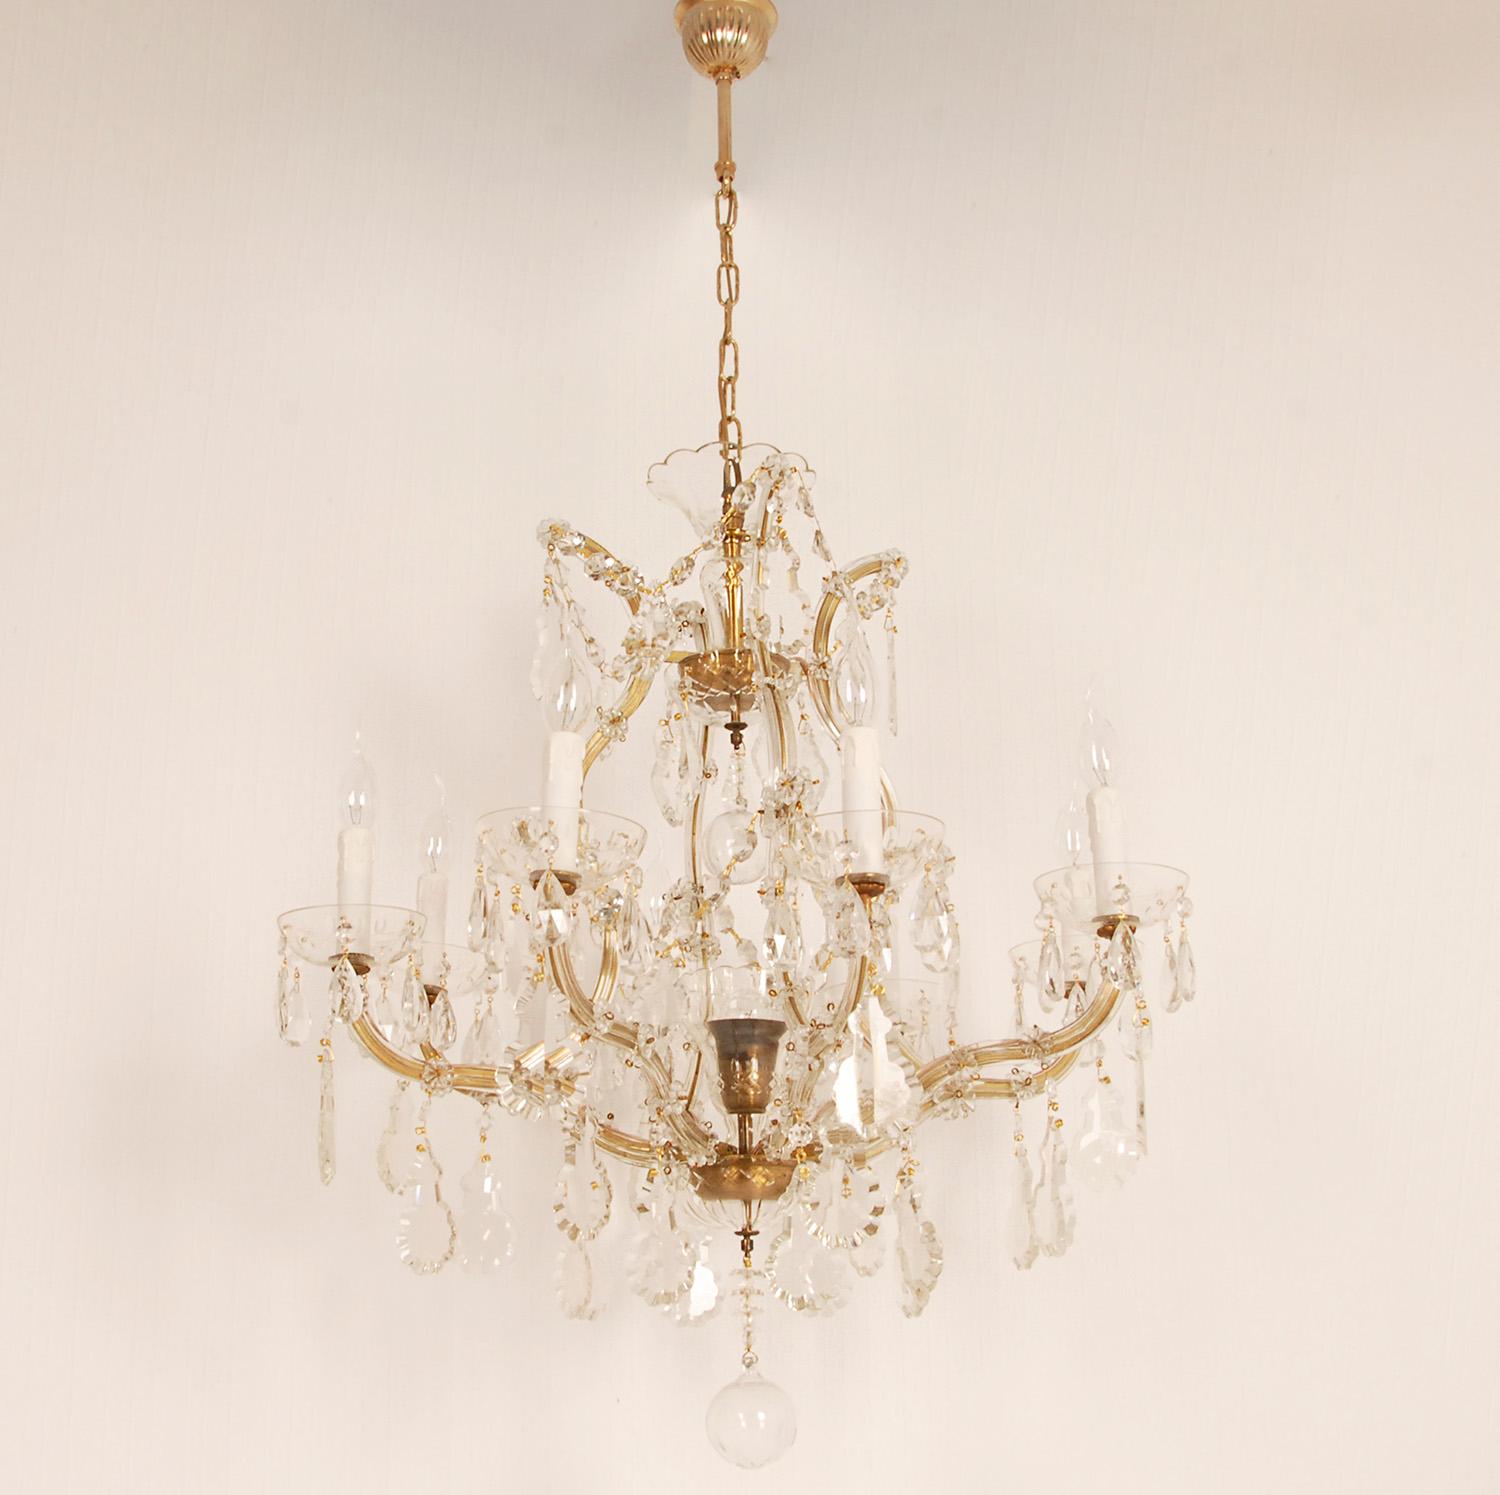 Vintage Viennese Crystal Chandelier 9 light gold frame cage chandelier
Material: Crystall, brass, blown glass
Design: In the manner of Viennese Marie Therese, Baguès, Baccarat, Murano, Venice glass, Banci Firenze
Style: French Country, French